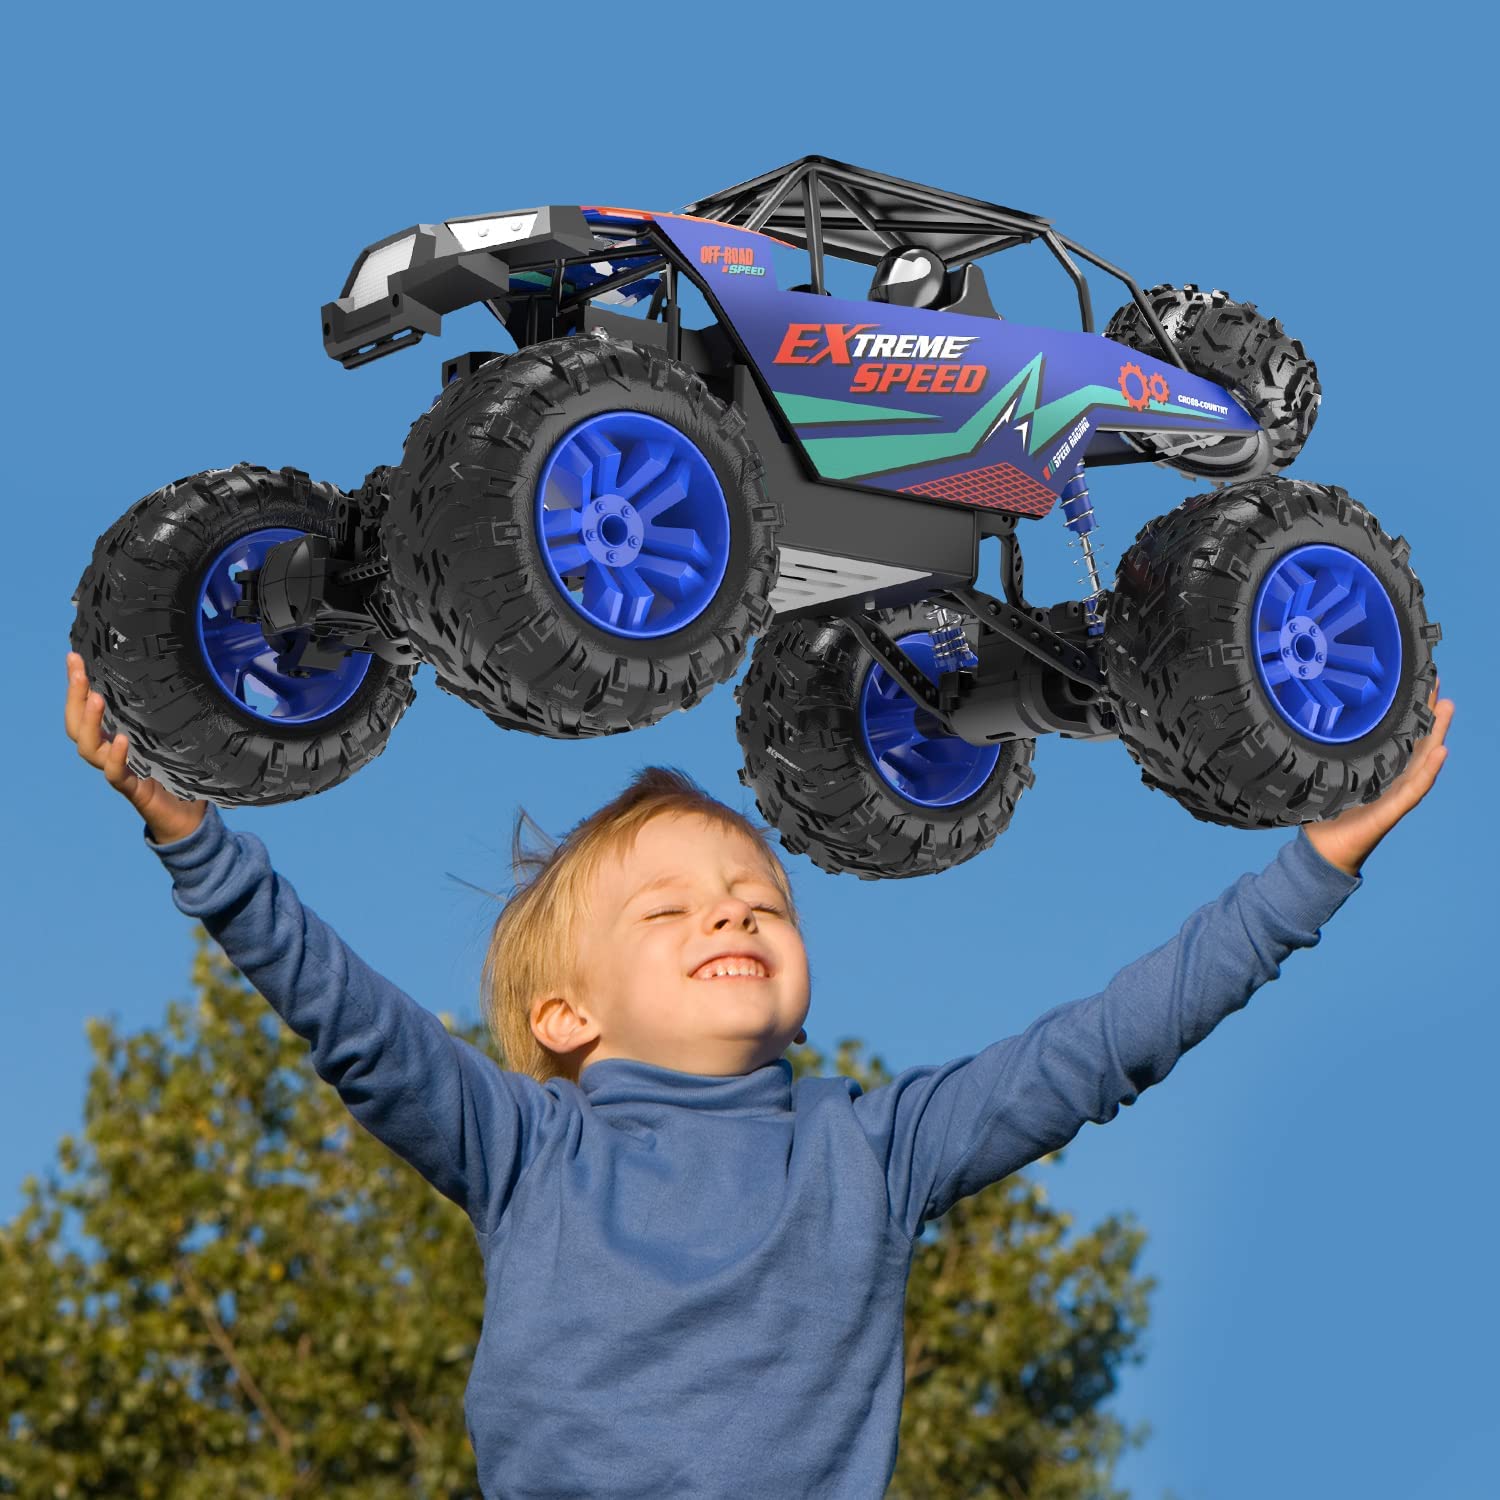 DEERC DE60 Large 1:8 Scale Upgraded RC Cars Remote Control Car for Adults Boys,Off Road Monster Truck with Realistic Sound,2.4Ghz 4WD Rock Crawler Toy All Terrain Climbing,2 Batteries for 80 Min Play